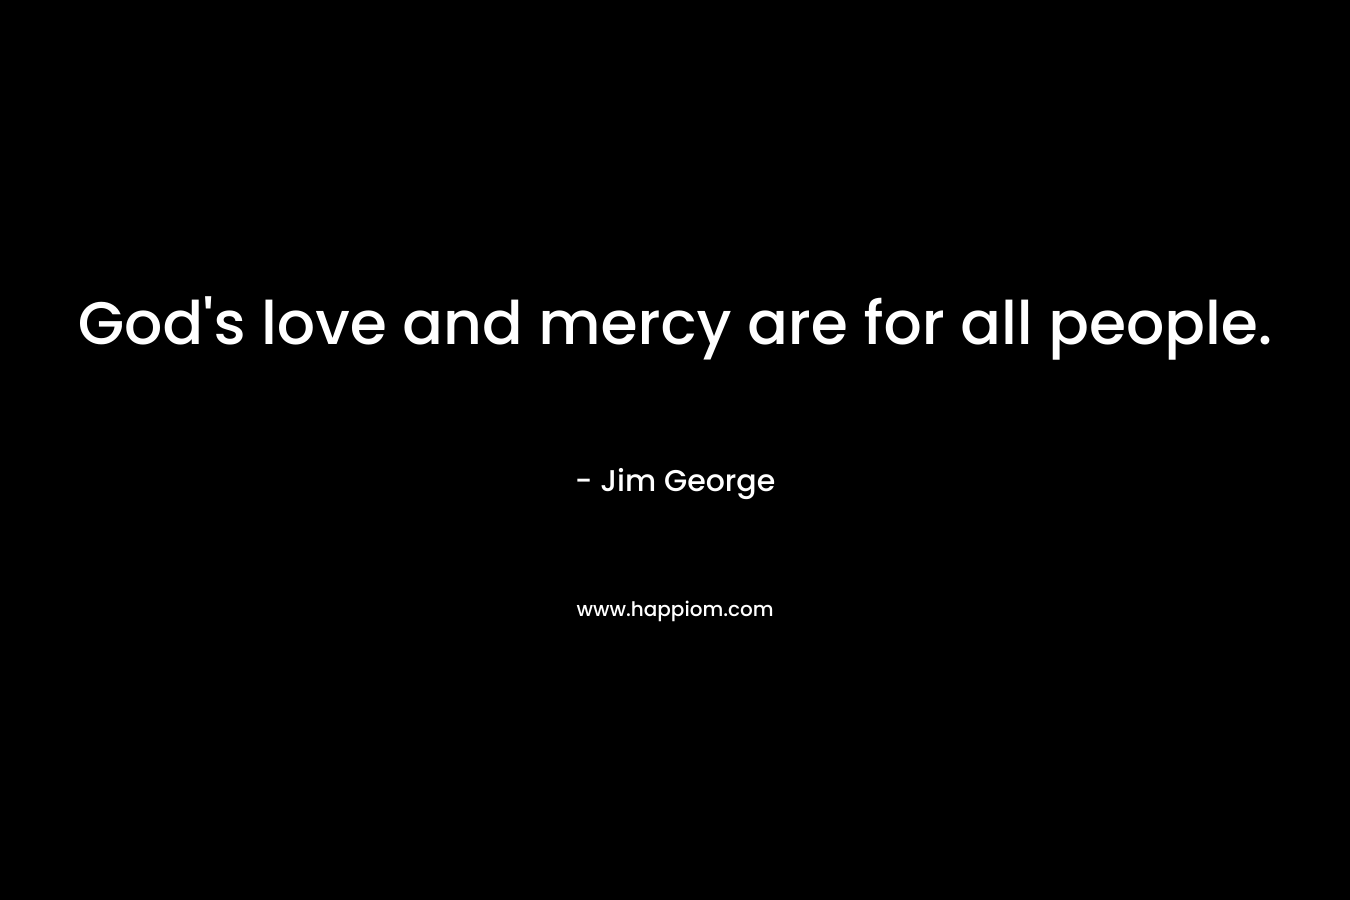 God's love and mercy are for all people.